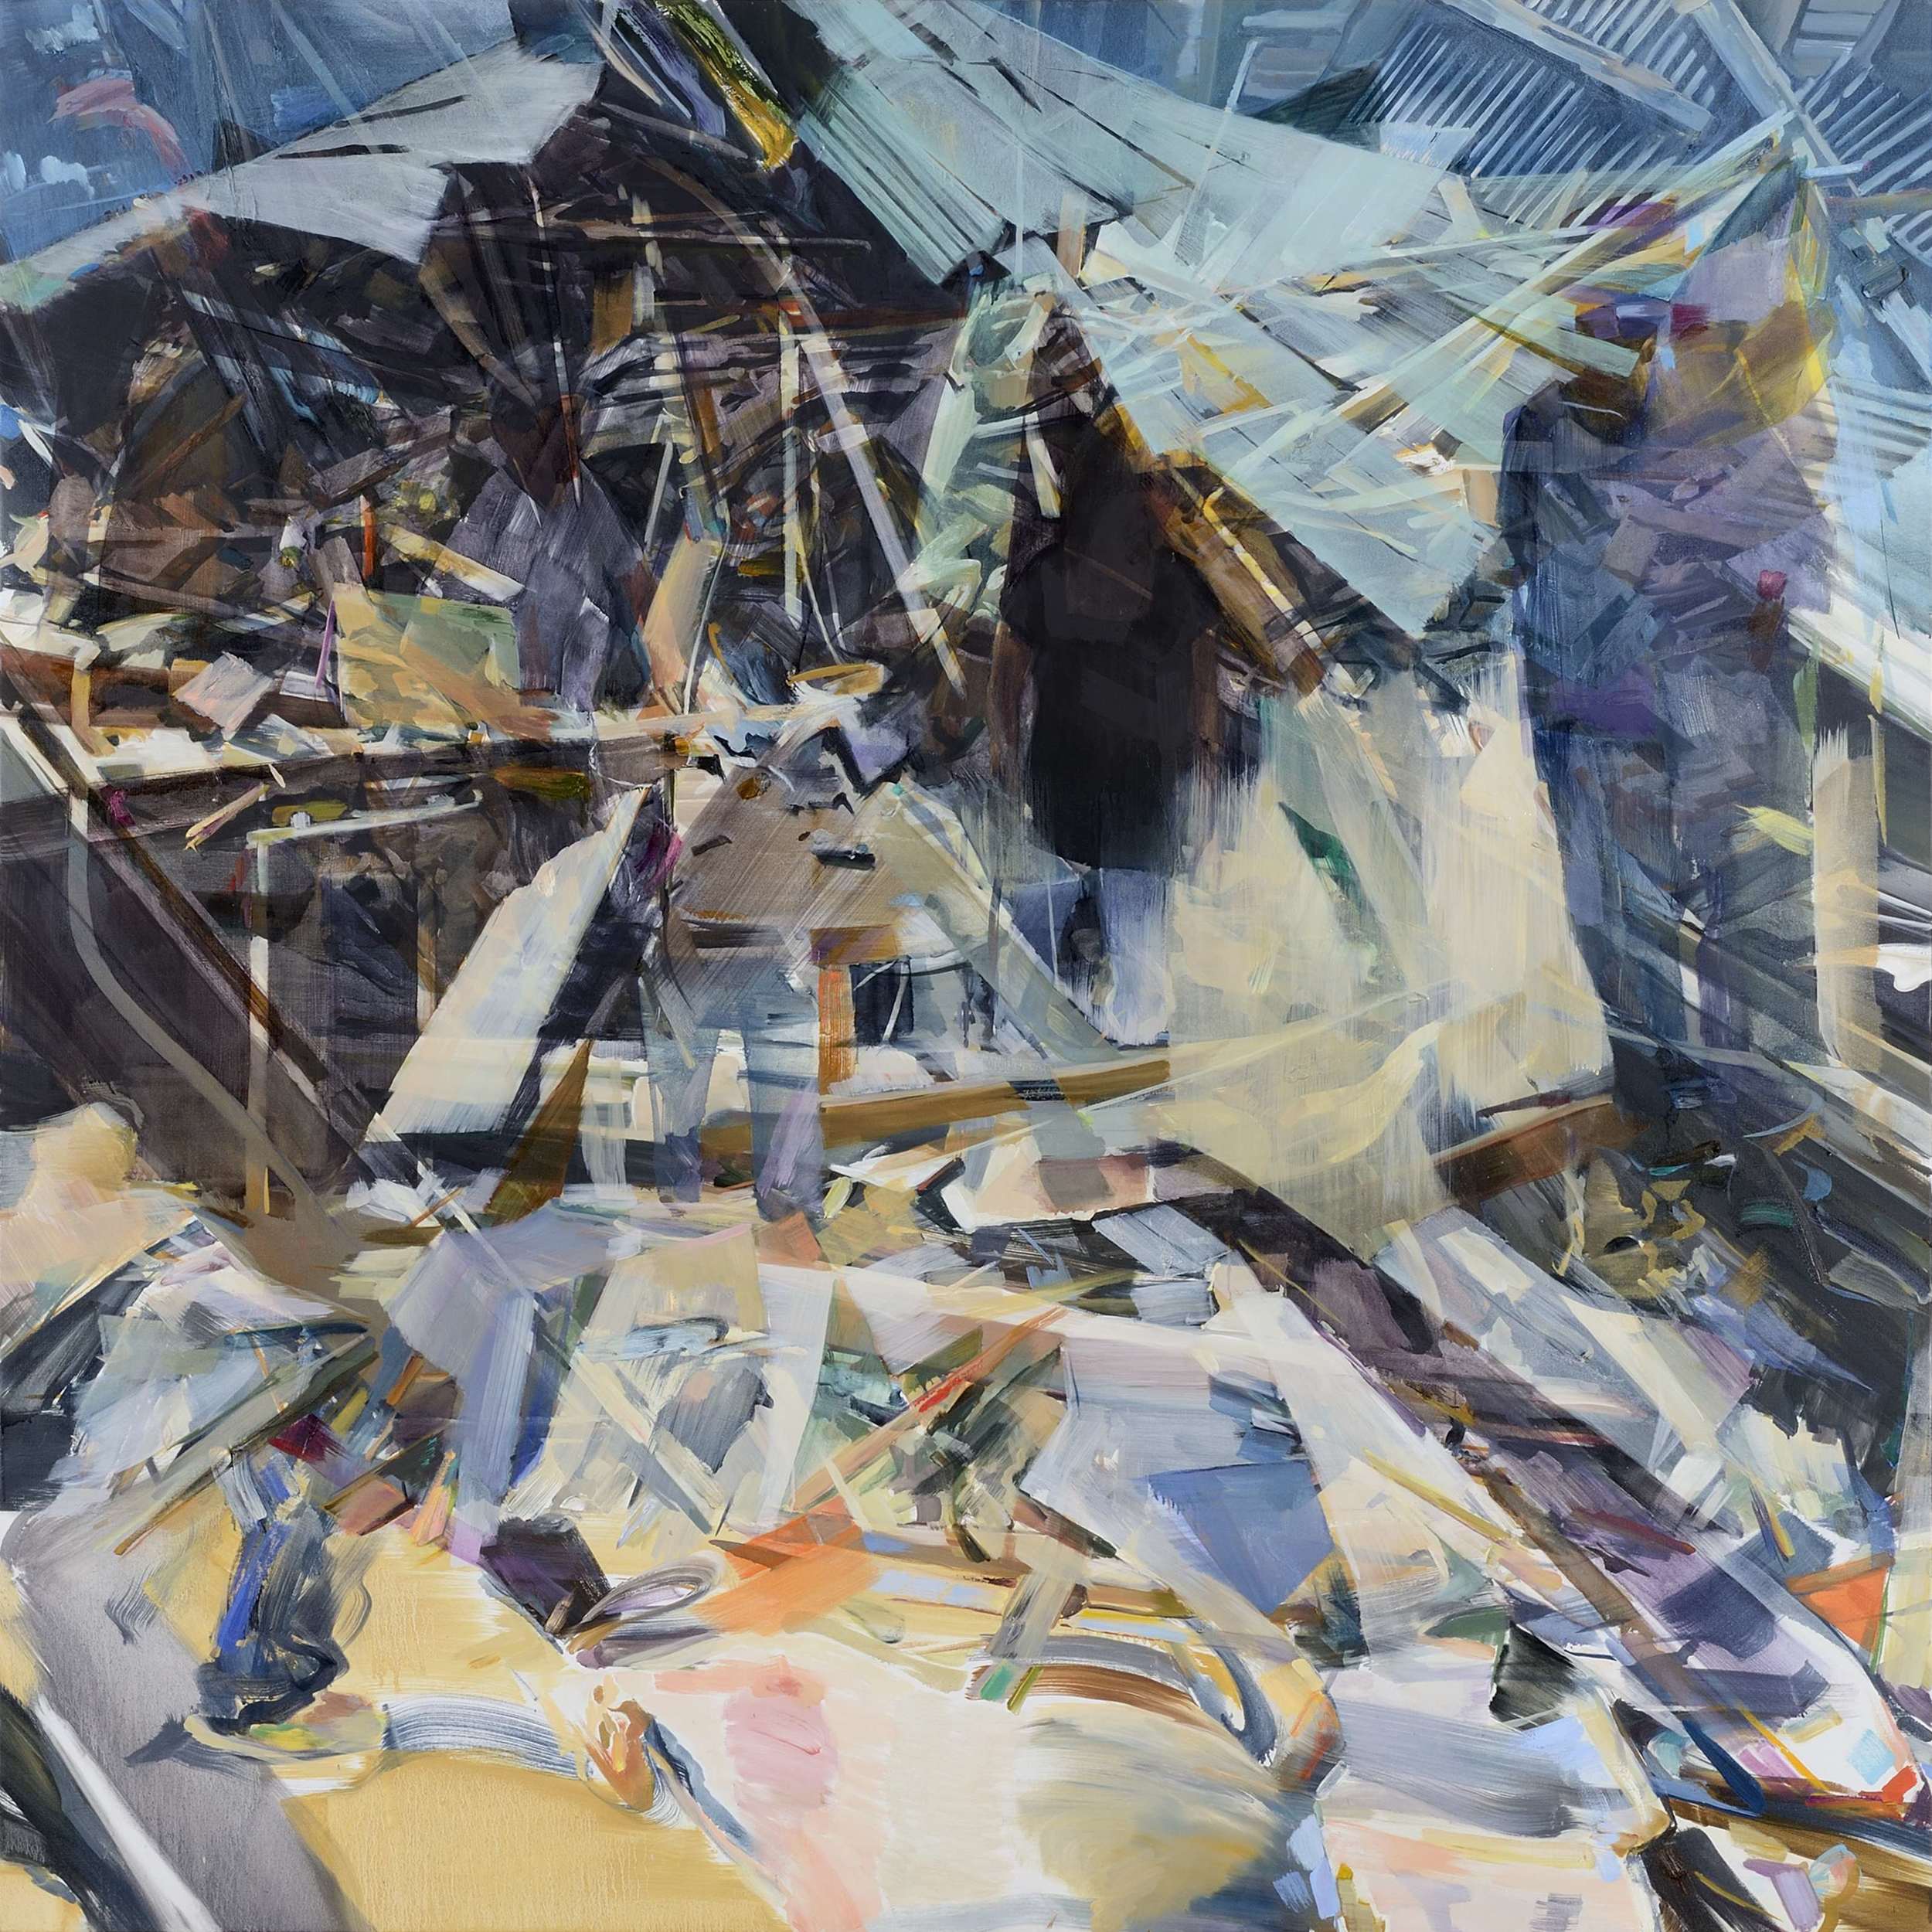   N'anga , 2013, oil and alkyd on canvas, 200 x 200cm. Private collection, Portugal 